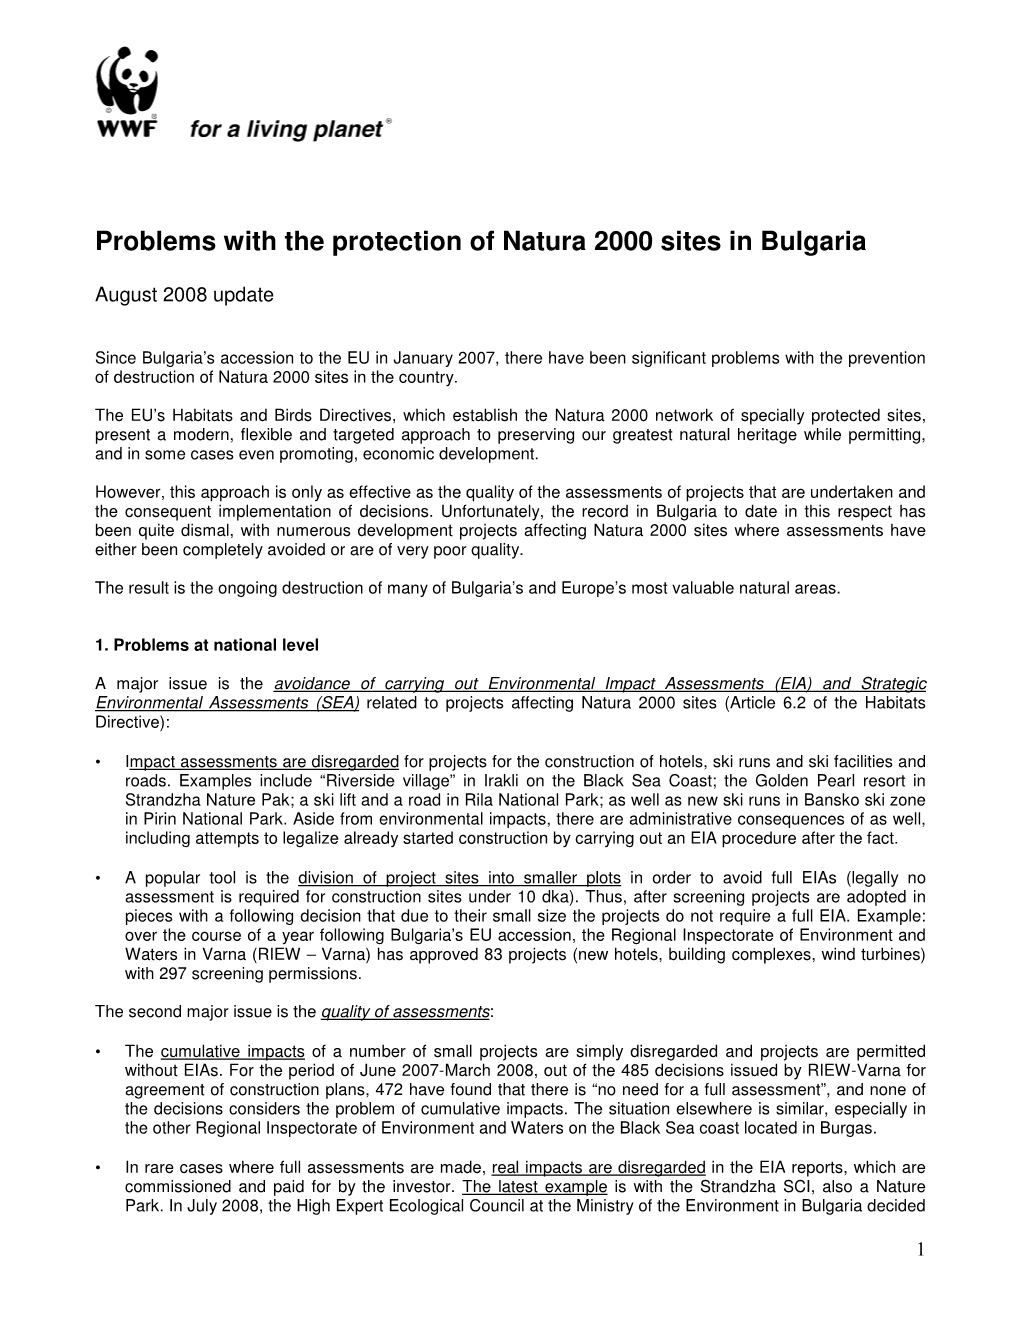 Problems with the Protection of Natura 2000 Sites in Bulgaria